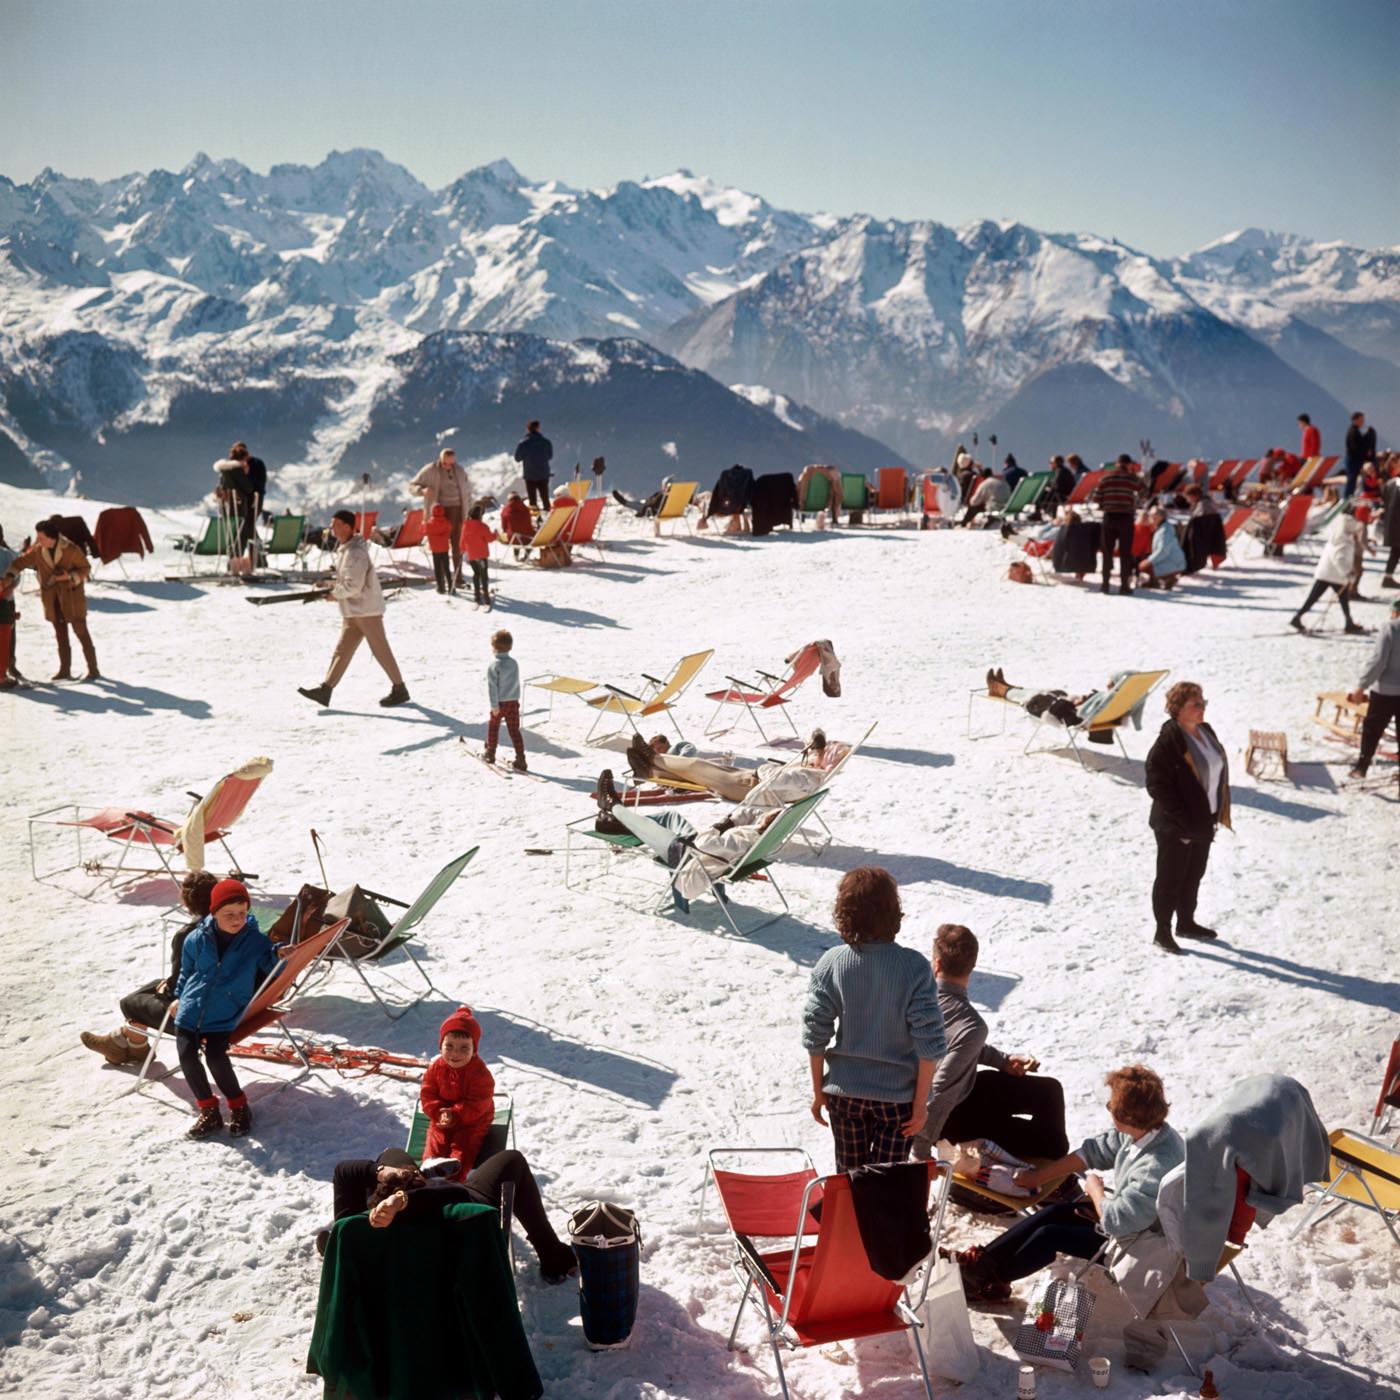 Slim Aarons Color Photograph - Verbier Vacation Estate Ed. Photograph, Swiss Alps skiers in red, blue, green